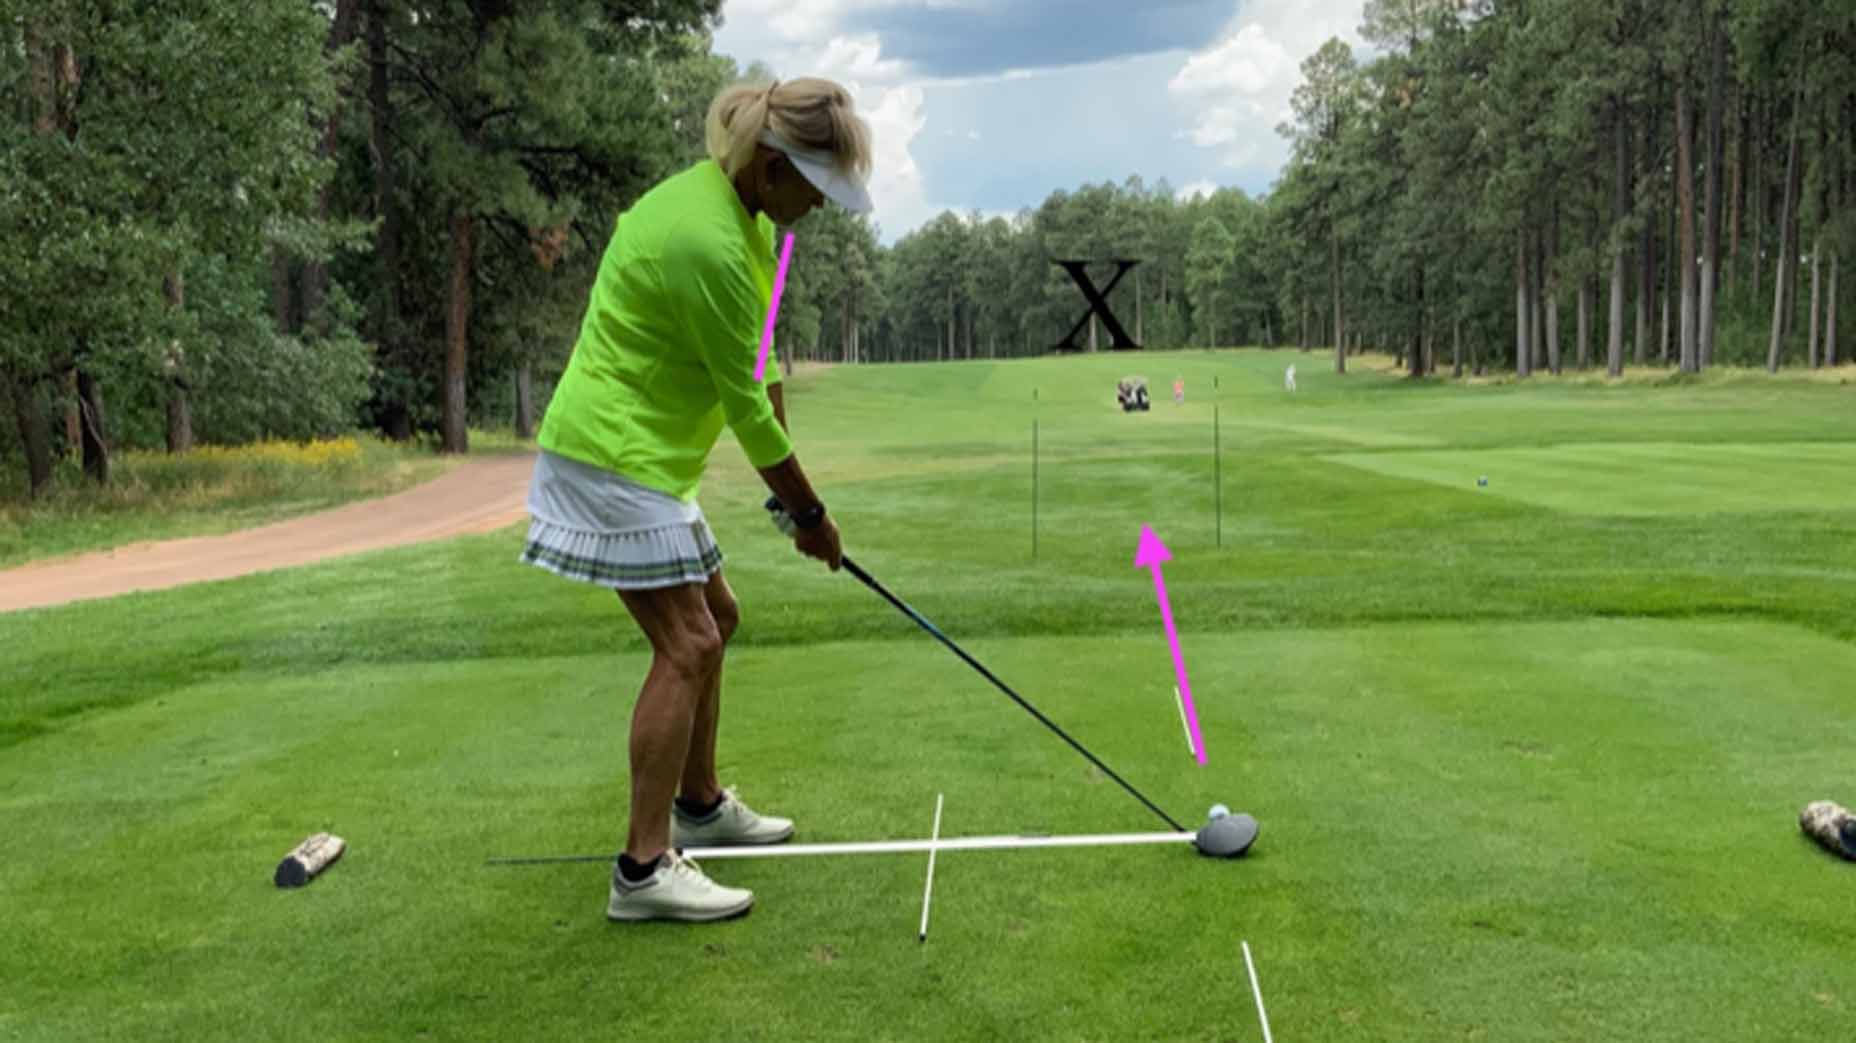 Women's golf tips: How to nail your aim and alignment before every shot